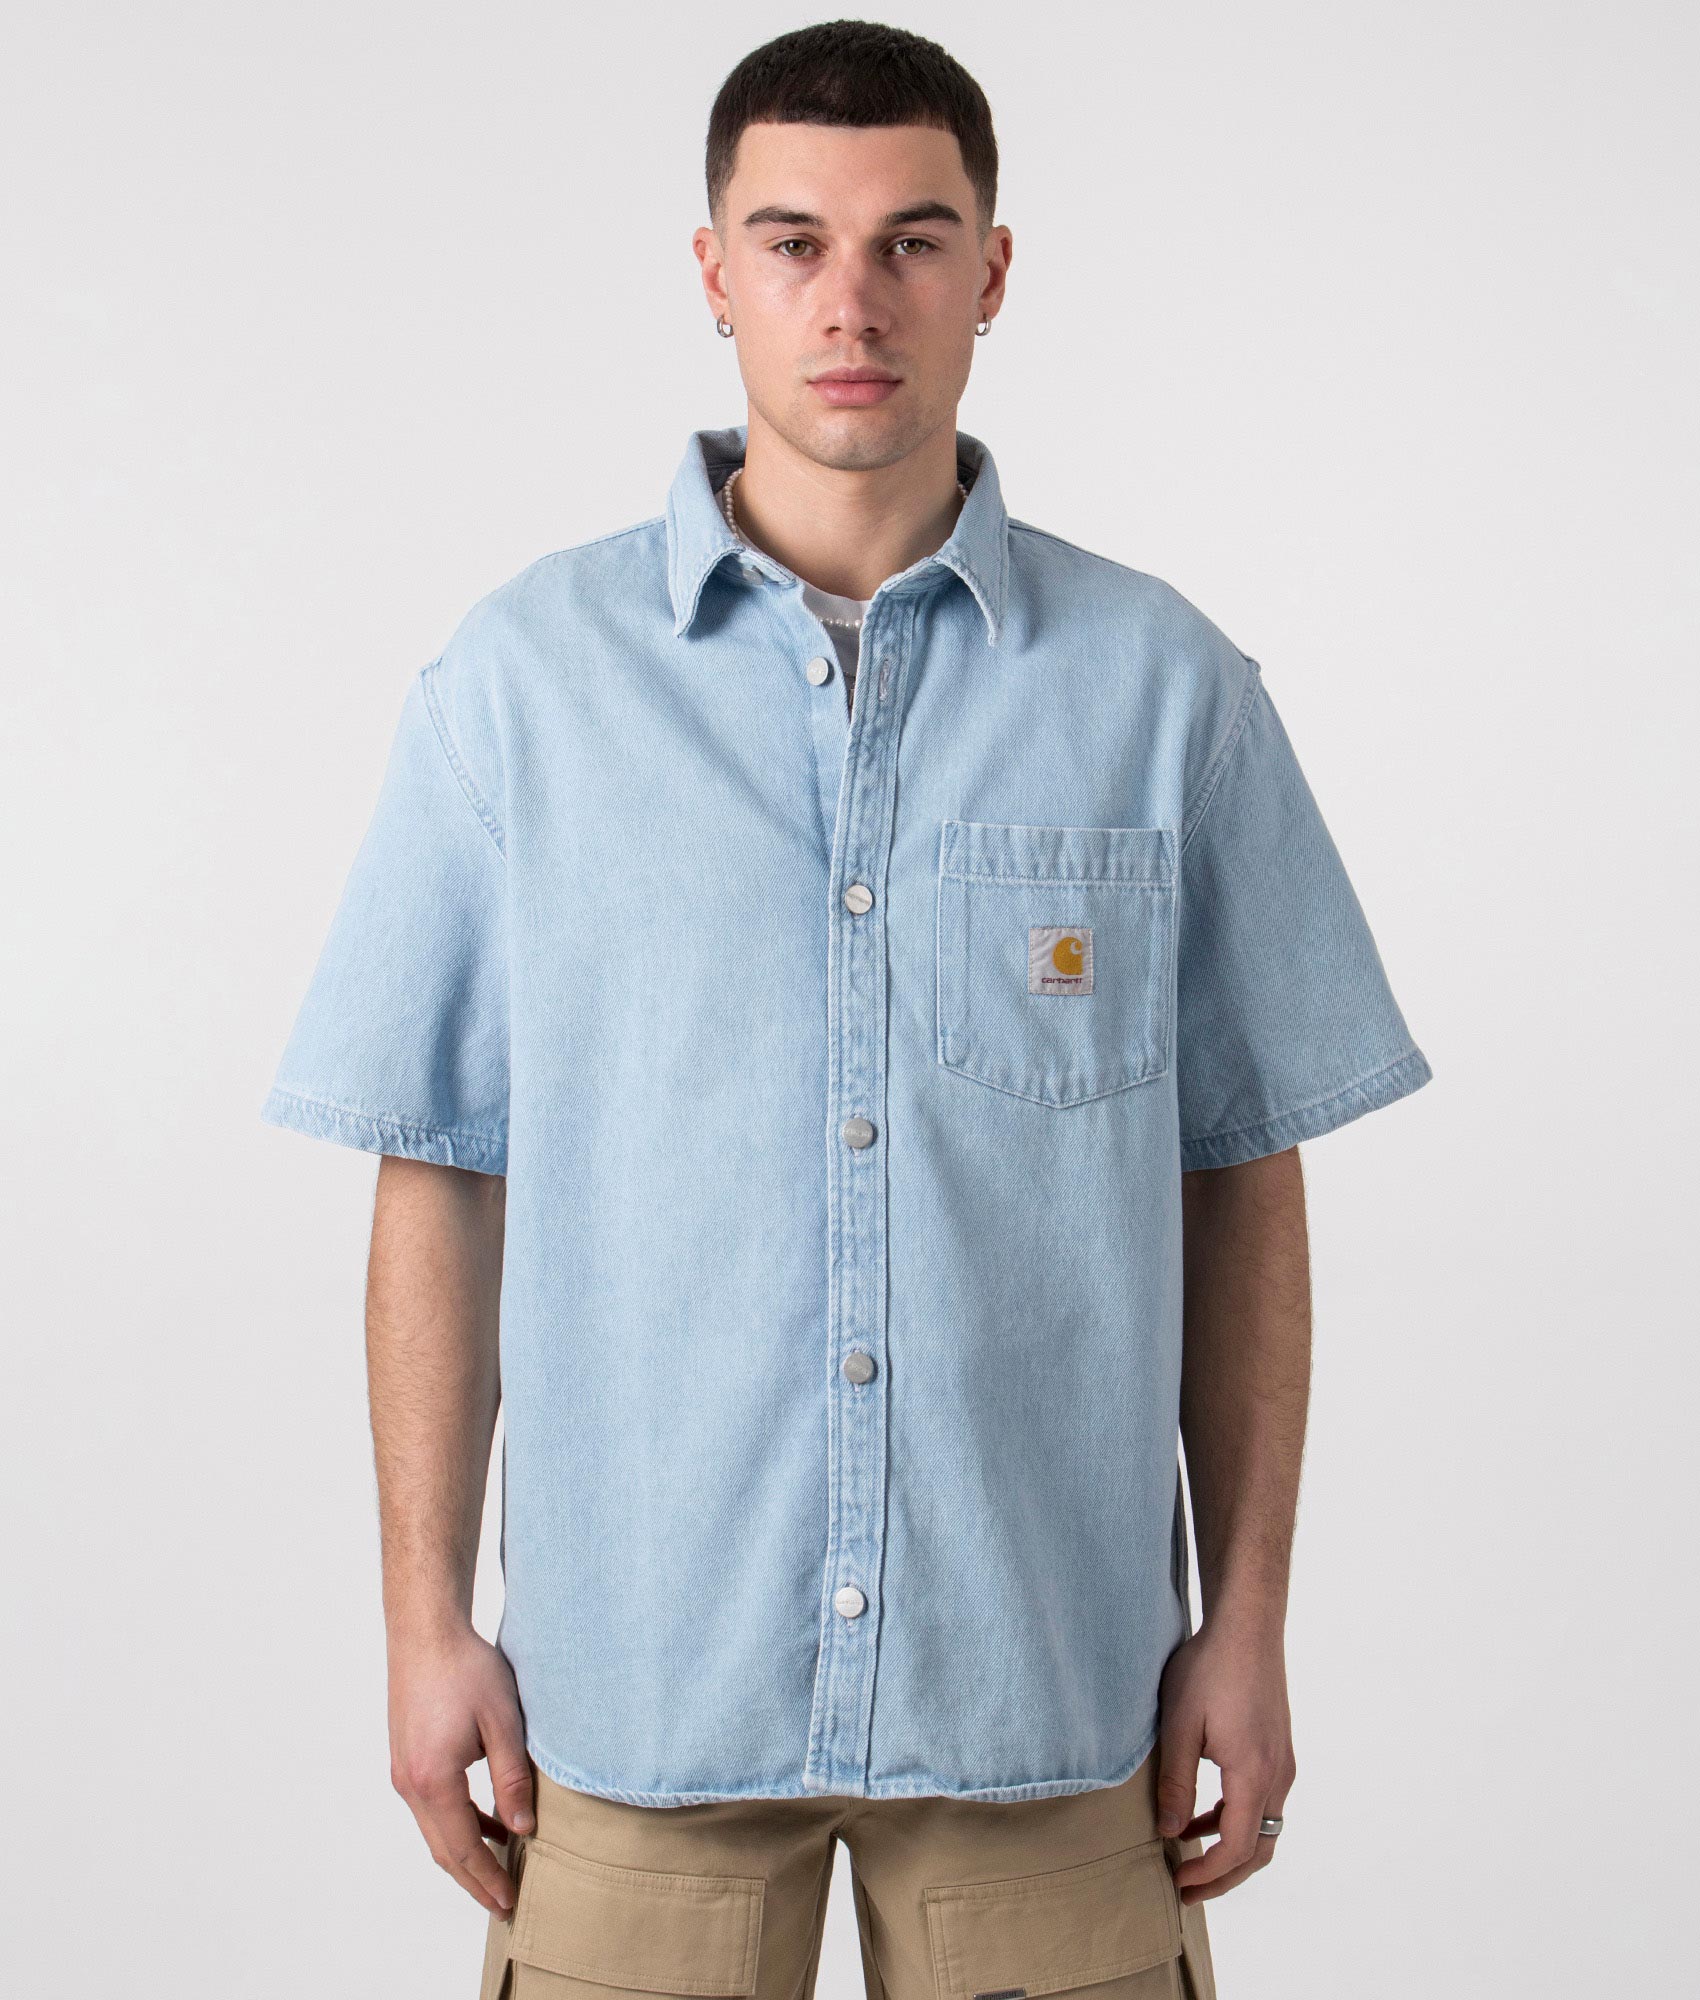 Carhartt WIP Mens Short Sleeve Ody Shirt - Colour: 112 Blue - Size: Large